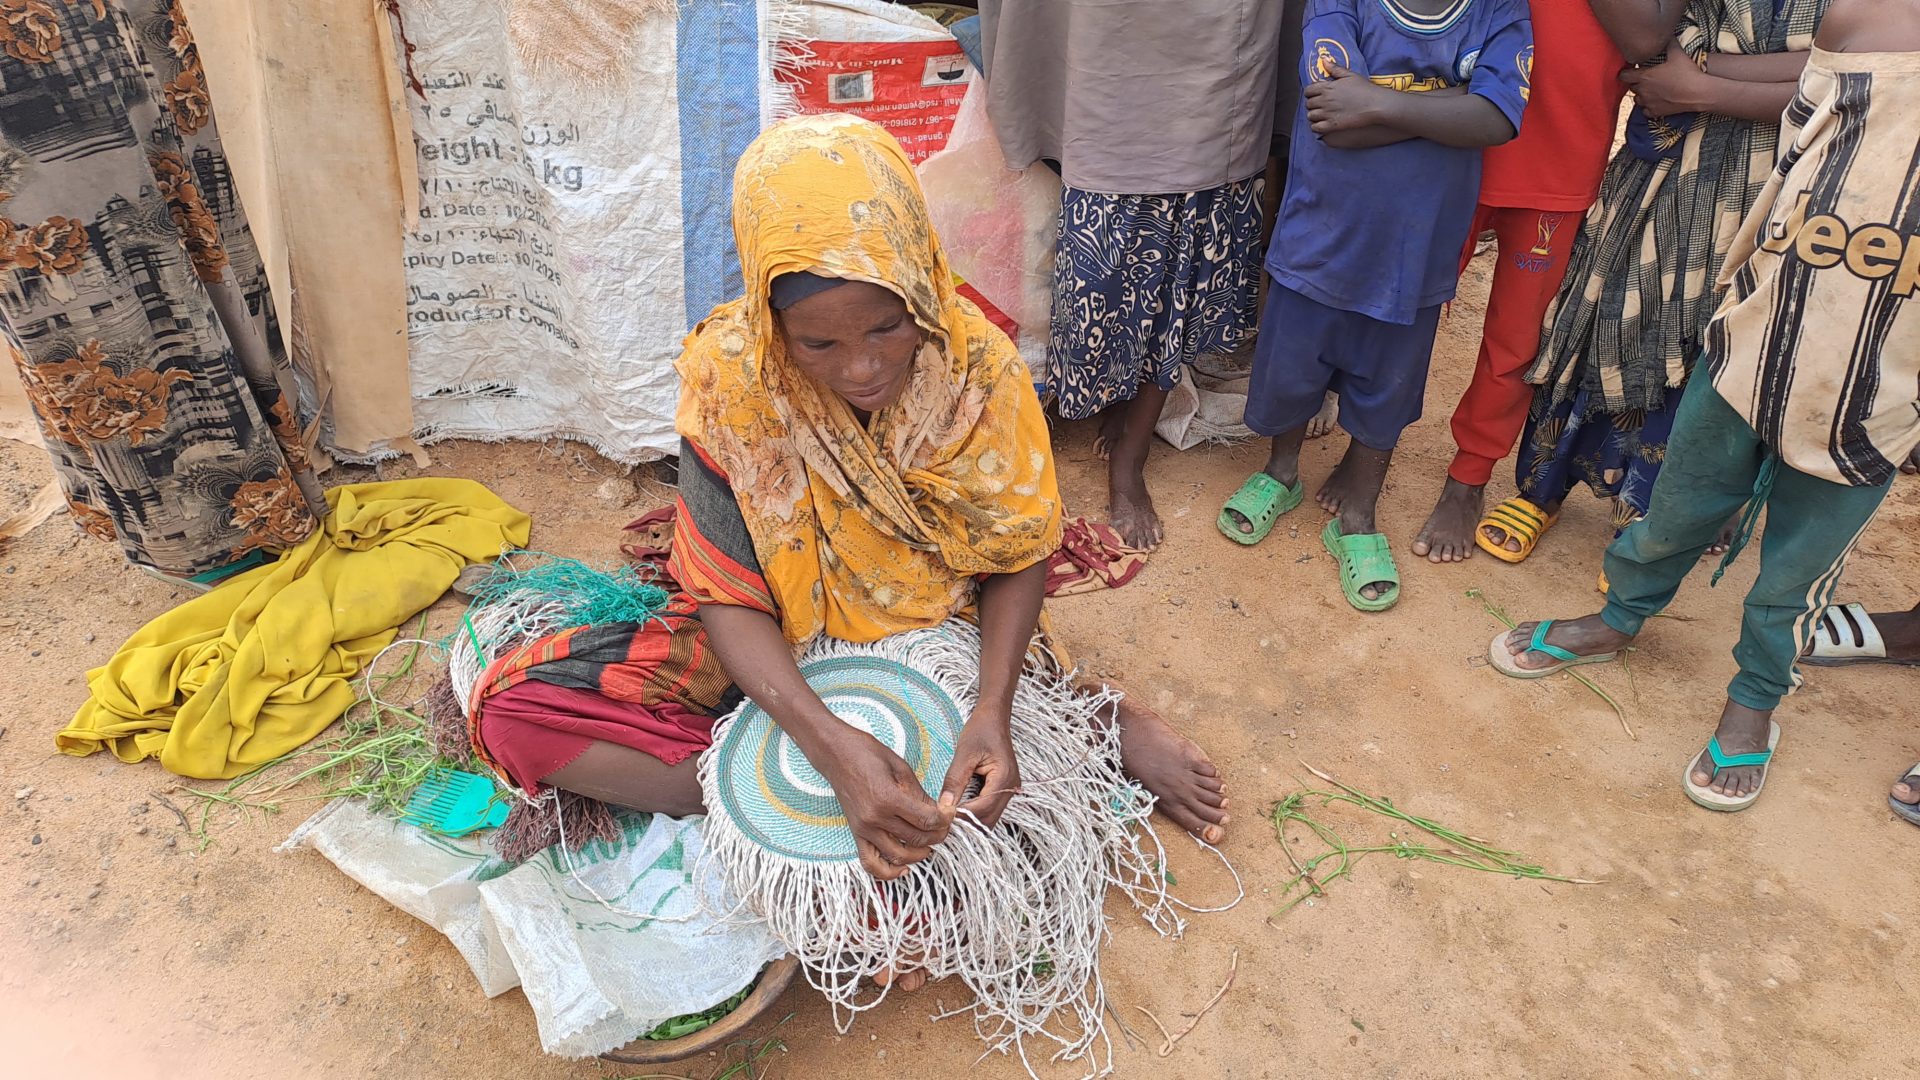 A woman at a camp for Internally Displaced People in Dolo, Somalia. She makes baskets, which takes her three days, and sells them for $5